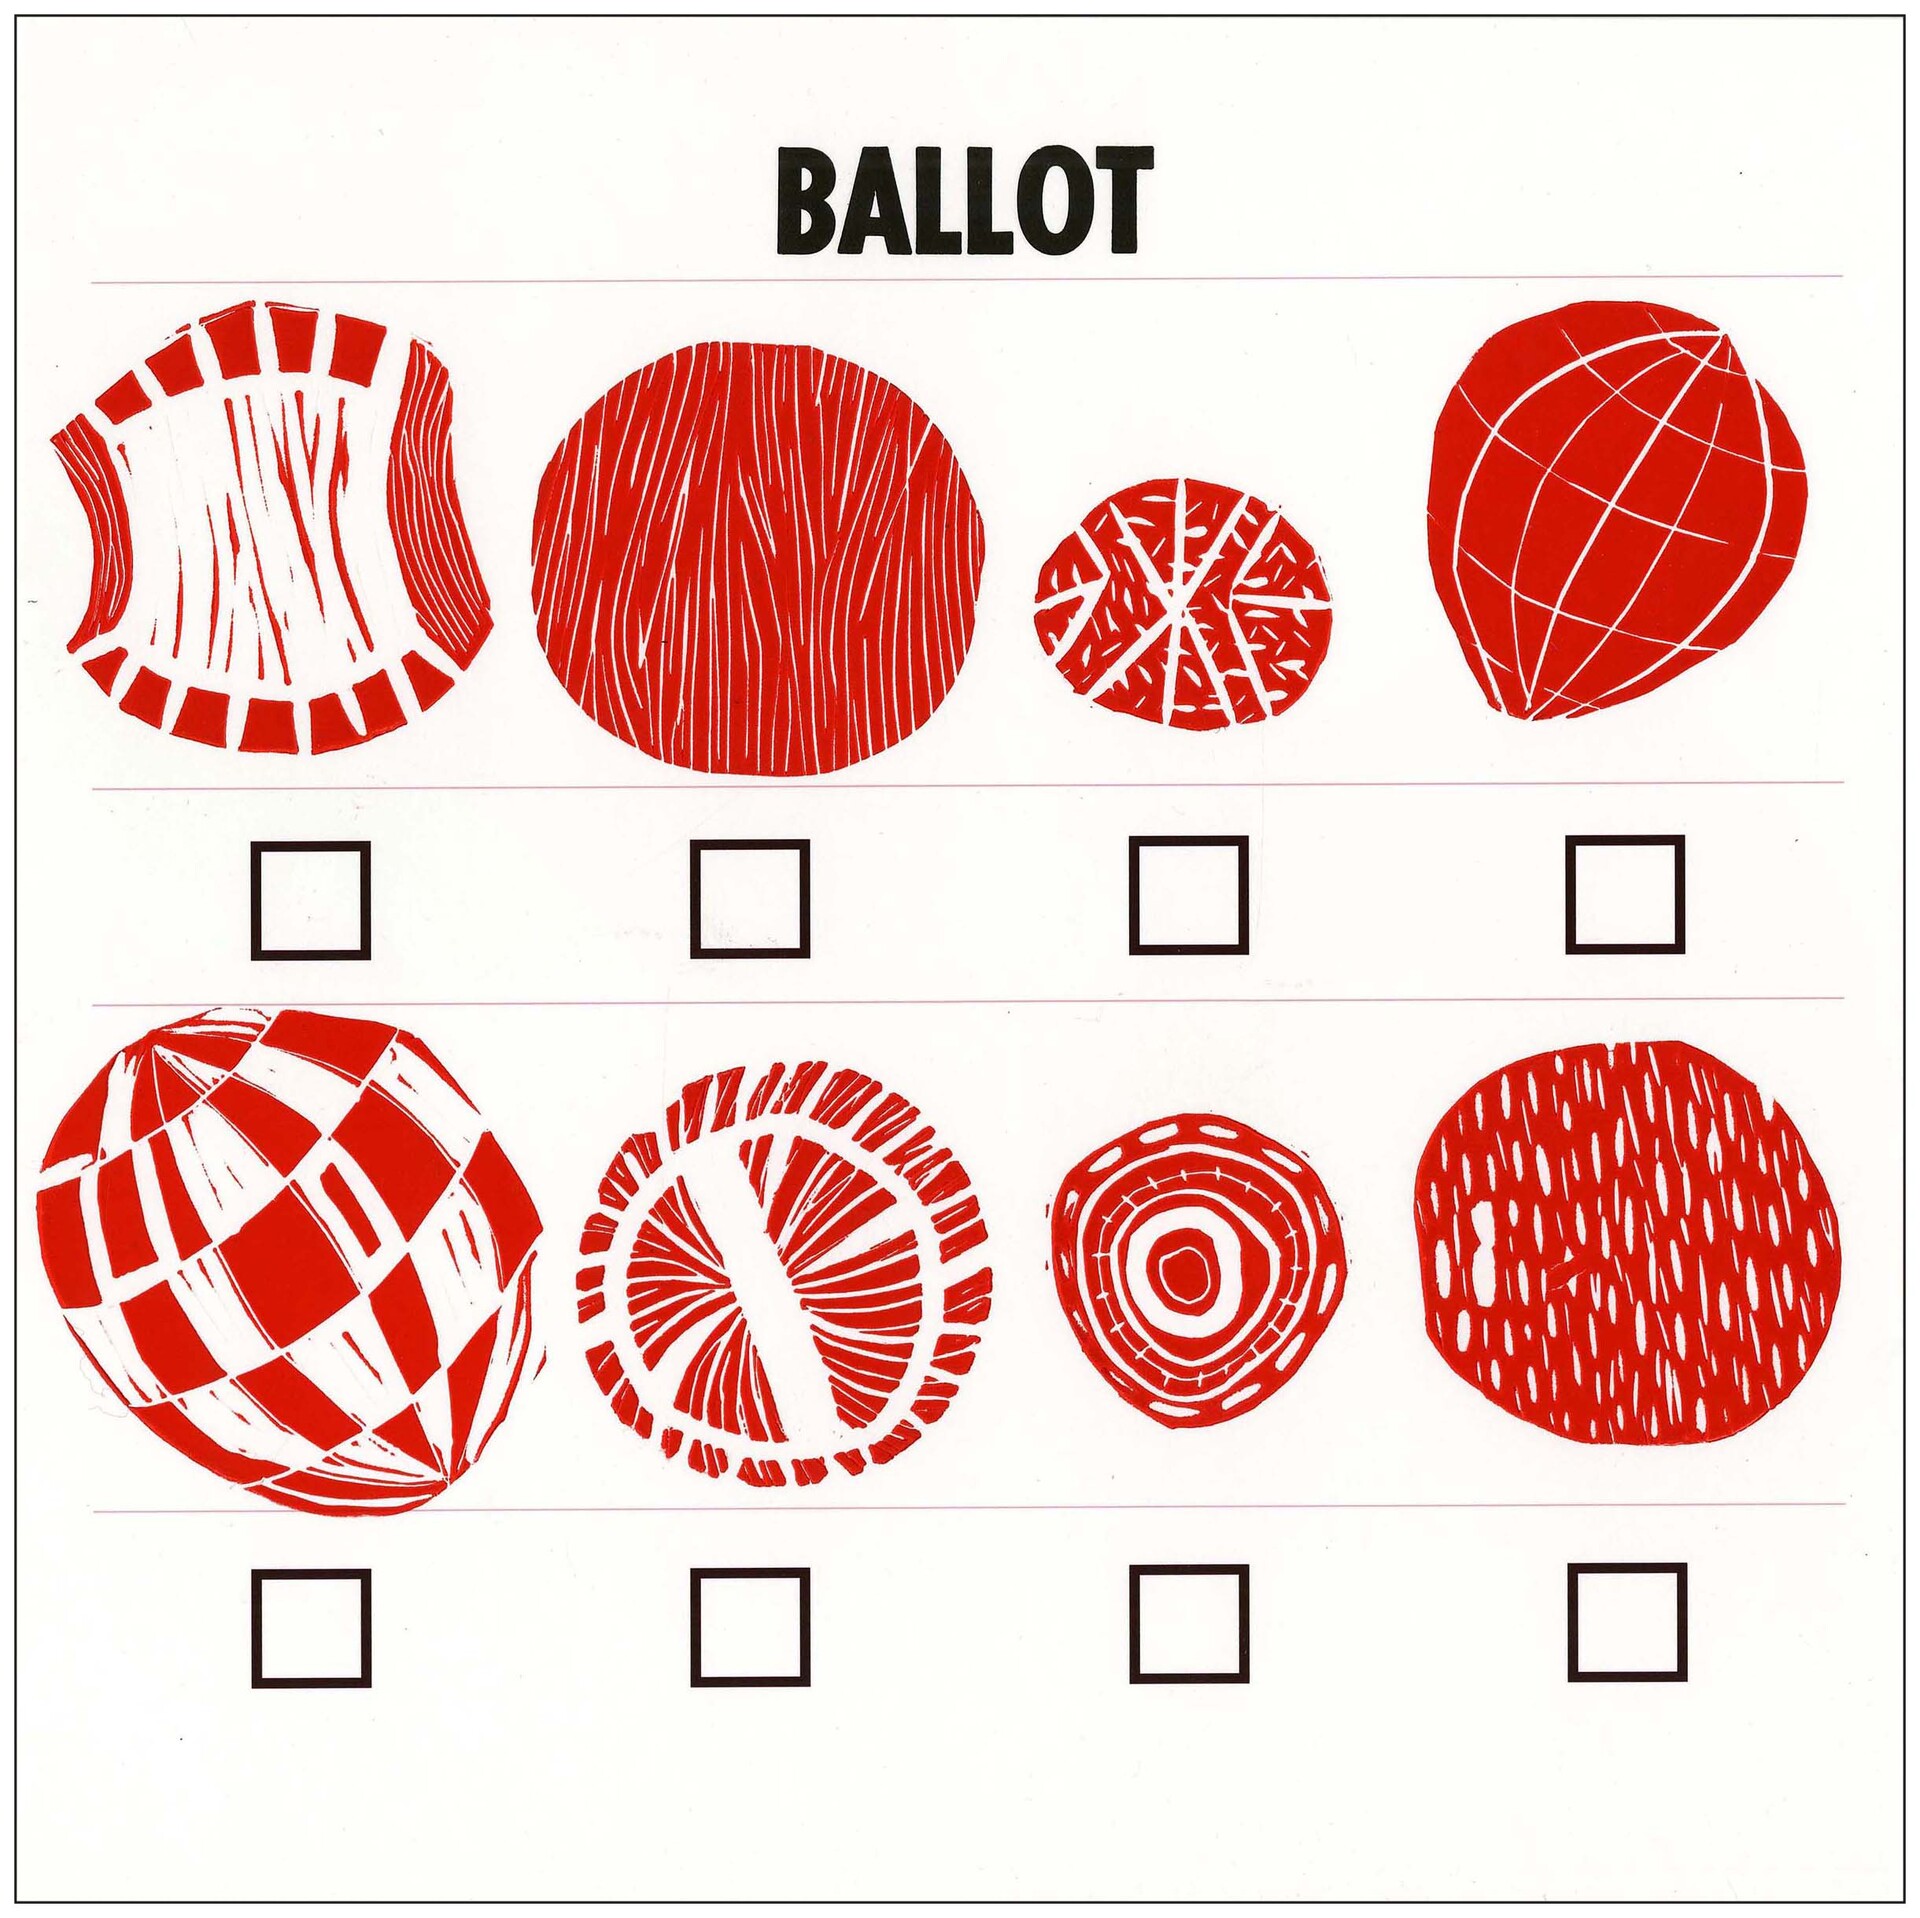 the word "Ballot" is on top of multiple red dot figures with black boxes underneath.